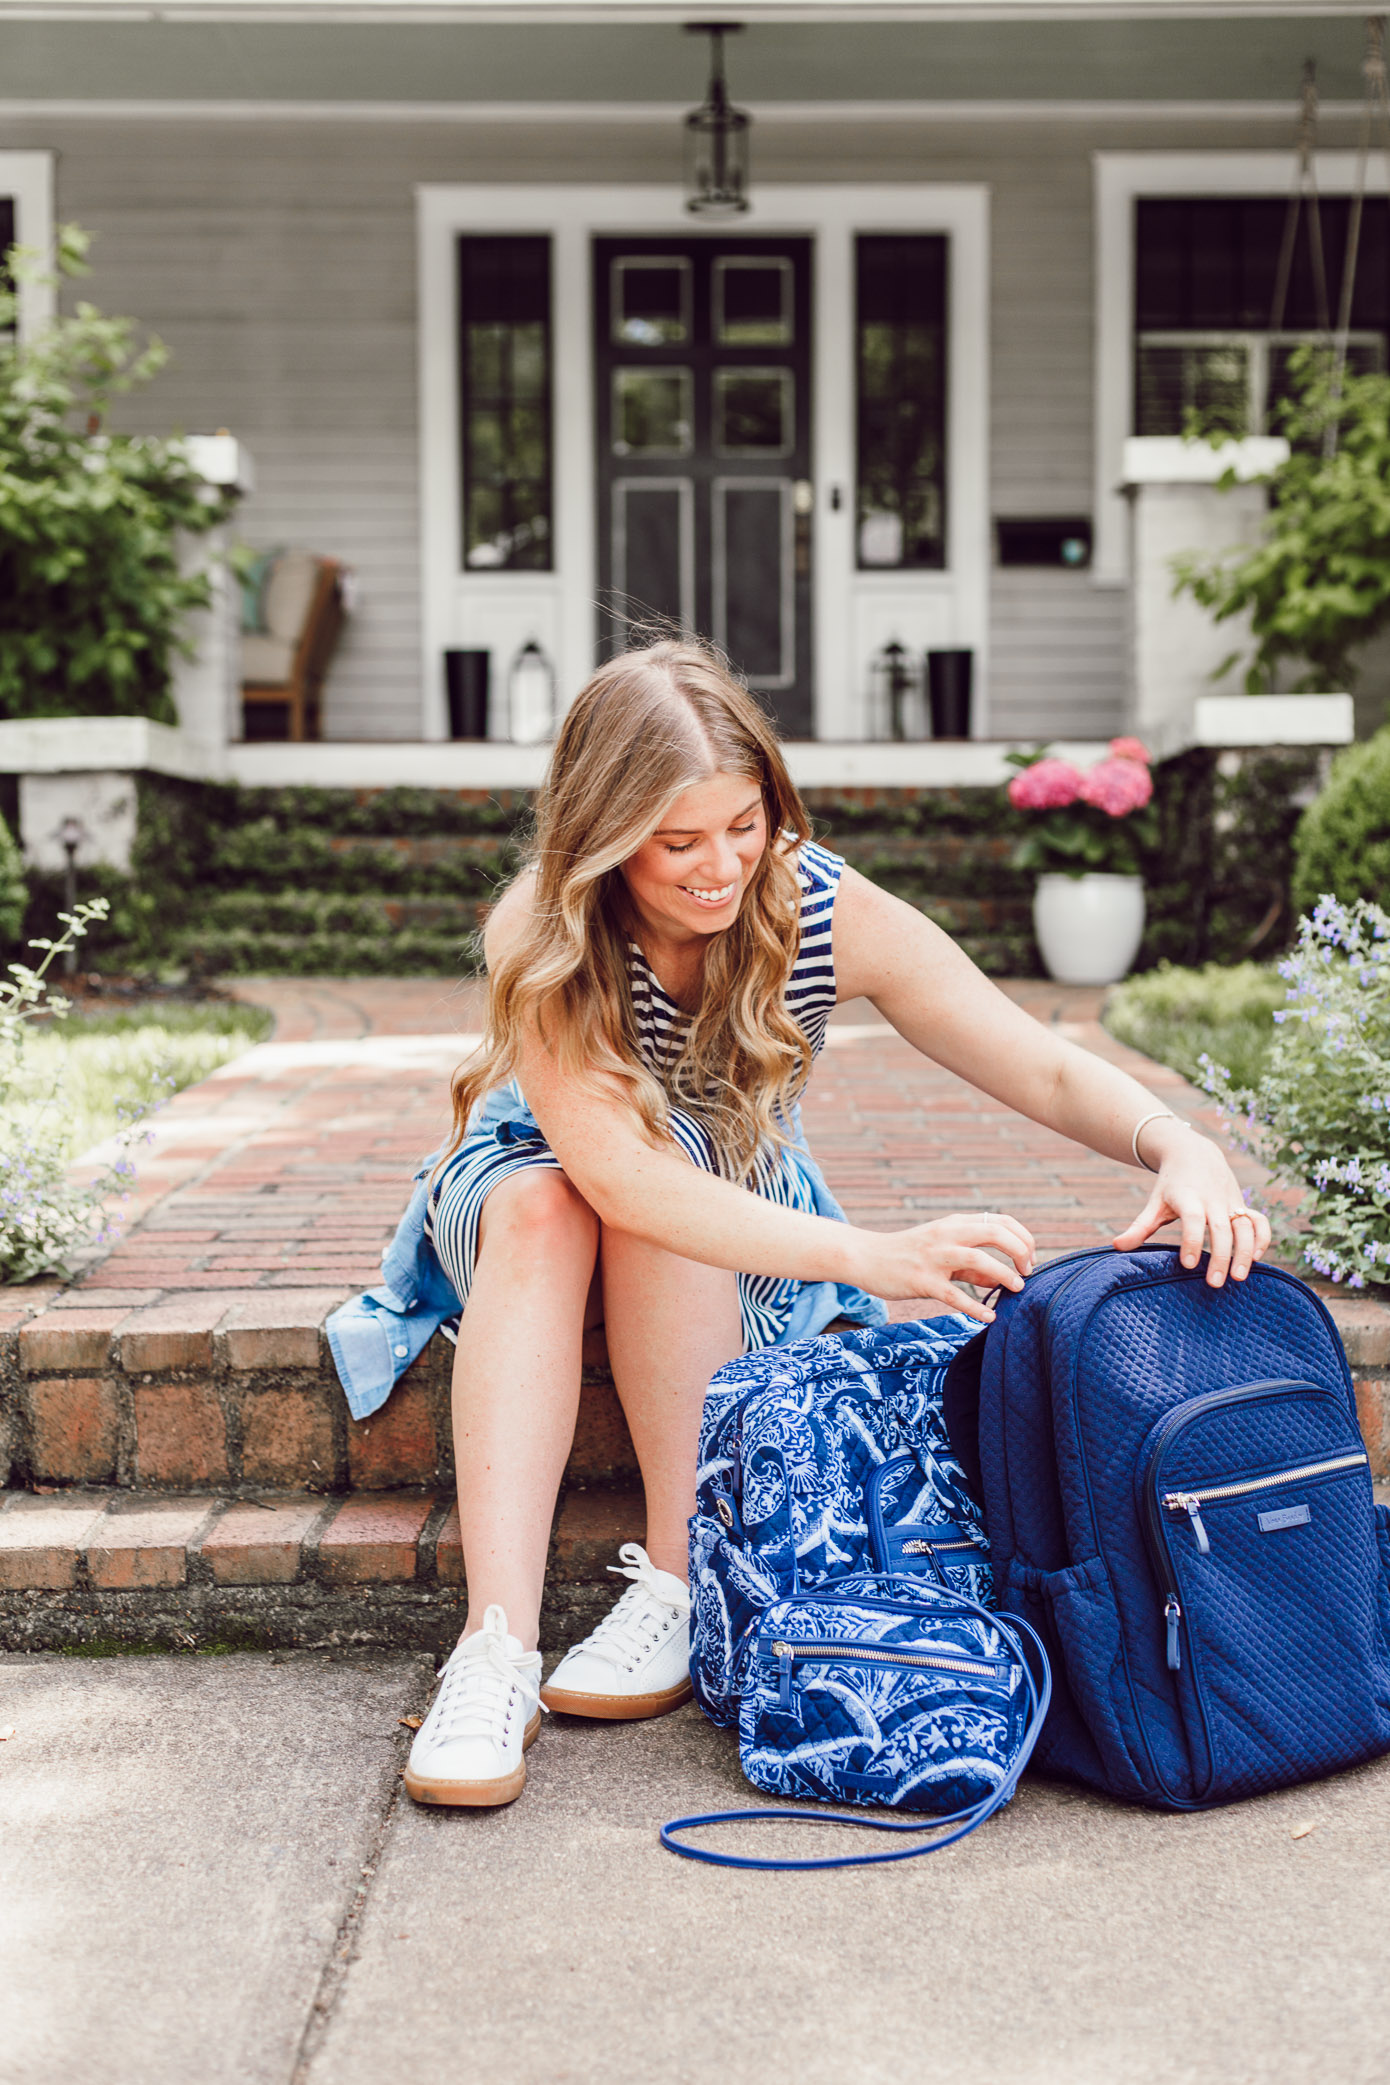 Summer Travel Packing Tips | Casual Summer Travel Outfit and Quilted Travel Bags | Louella Reese Life & Style Blog